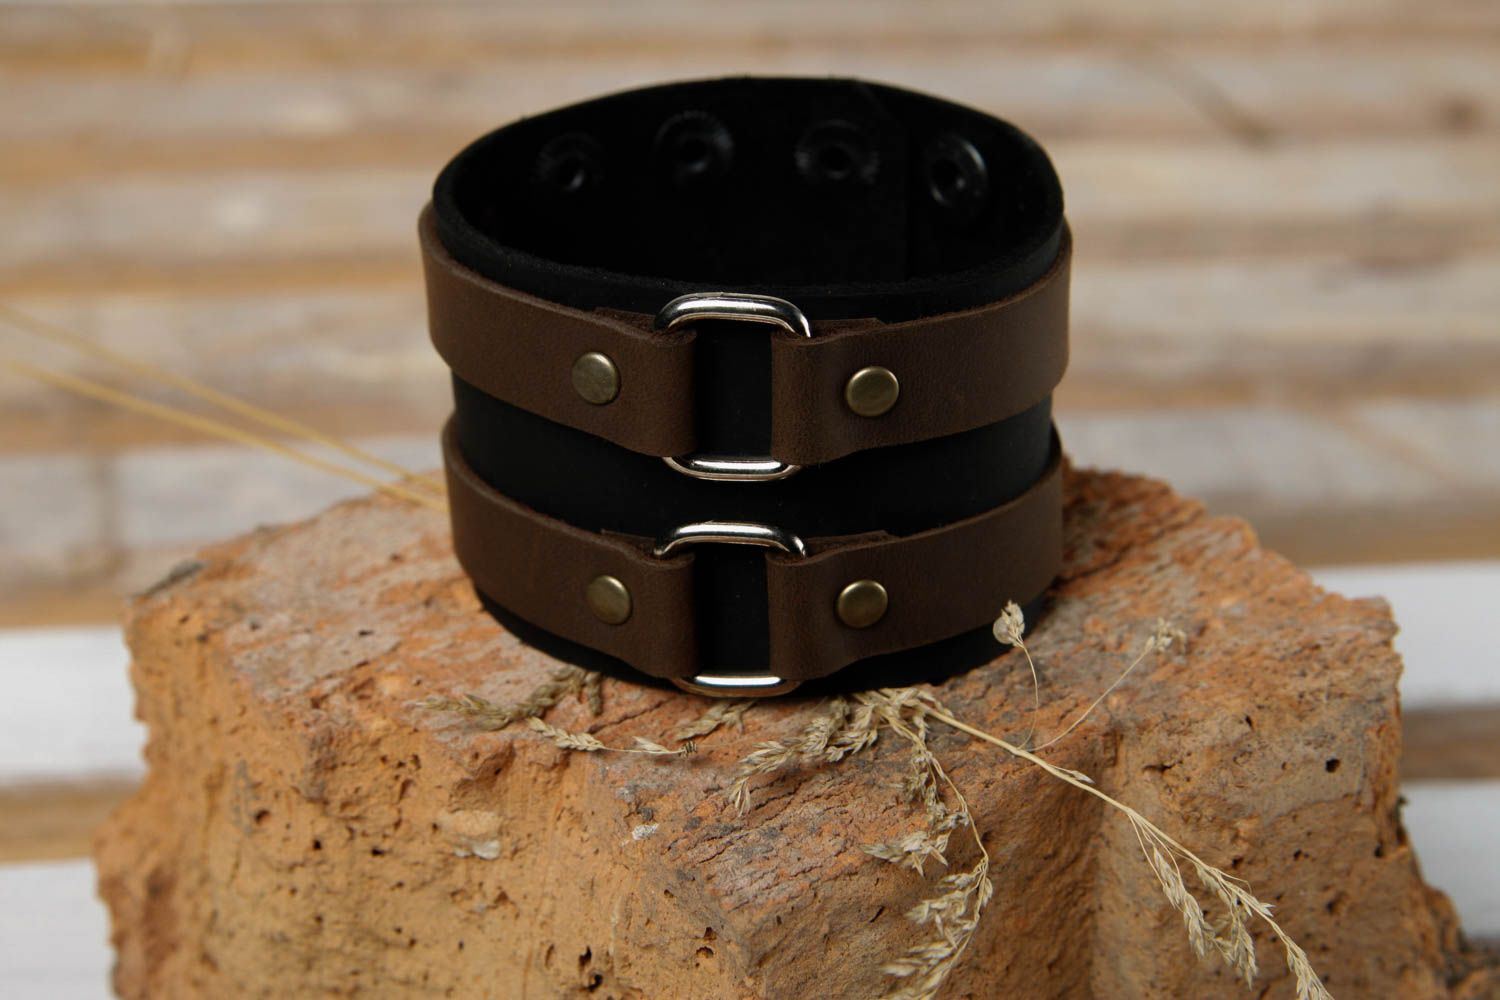 Handmade leather bracelet designs fashion accessories for girls costume jewelry photo 1